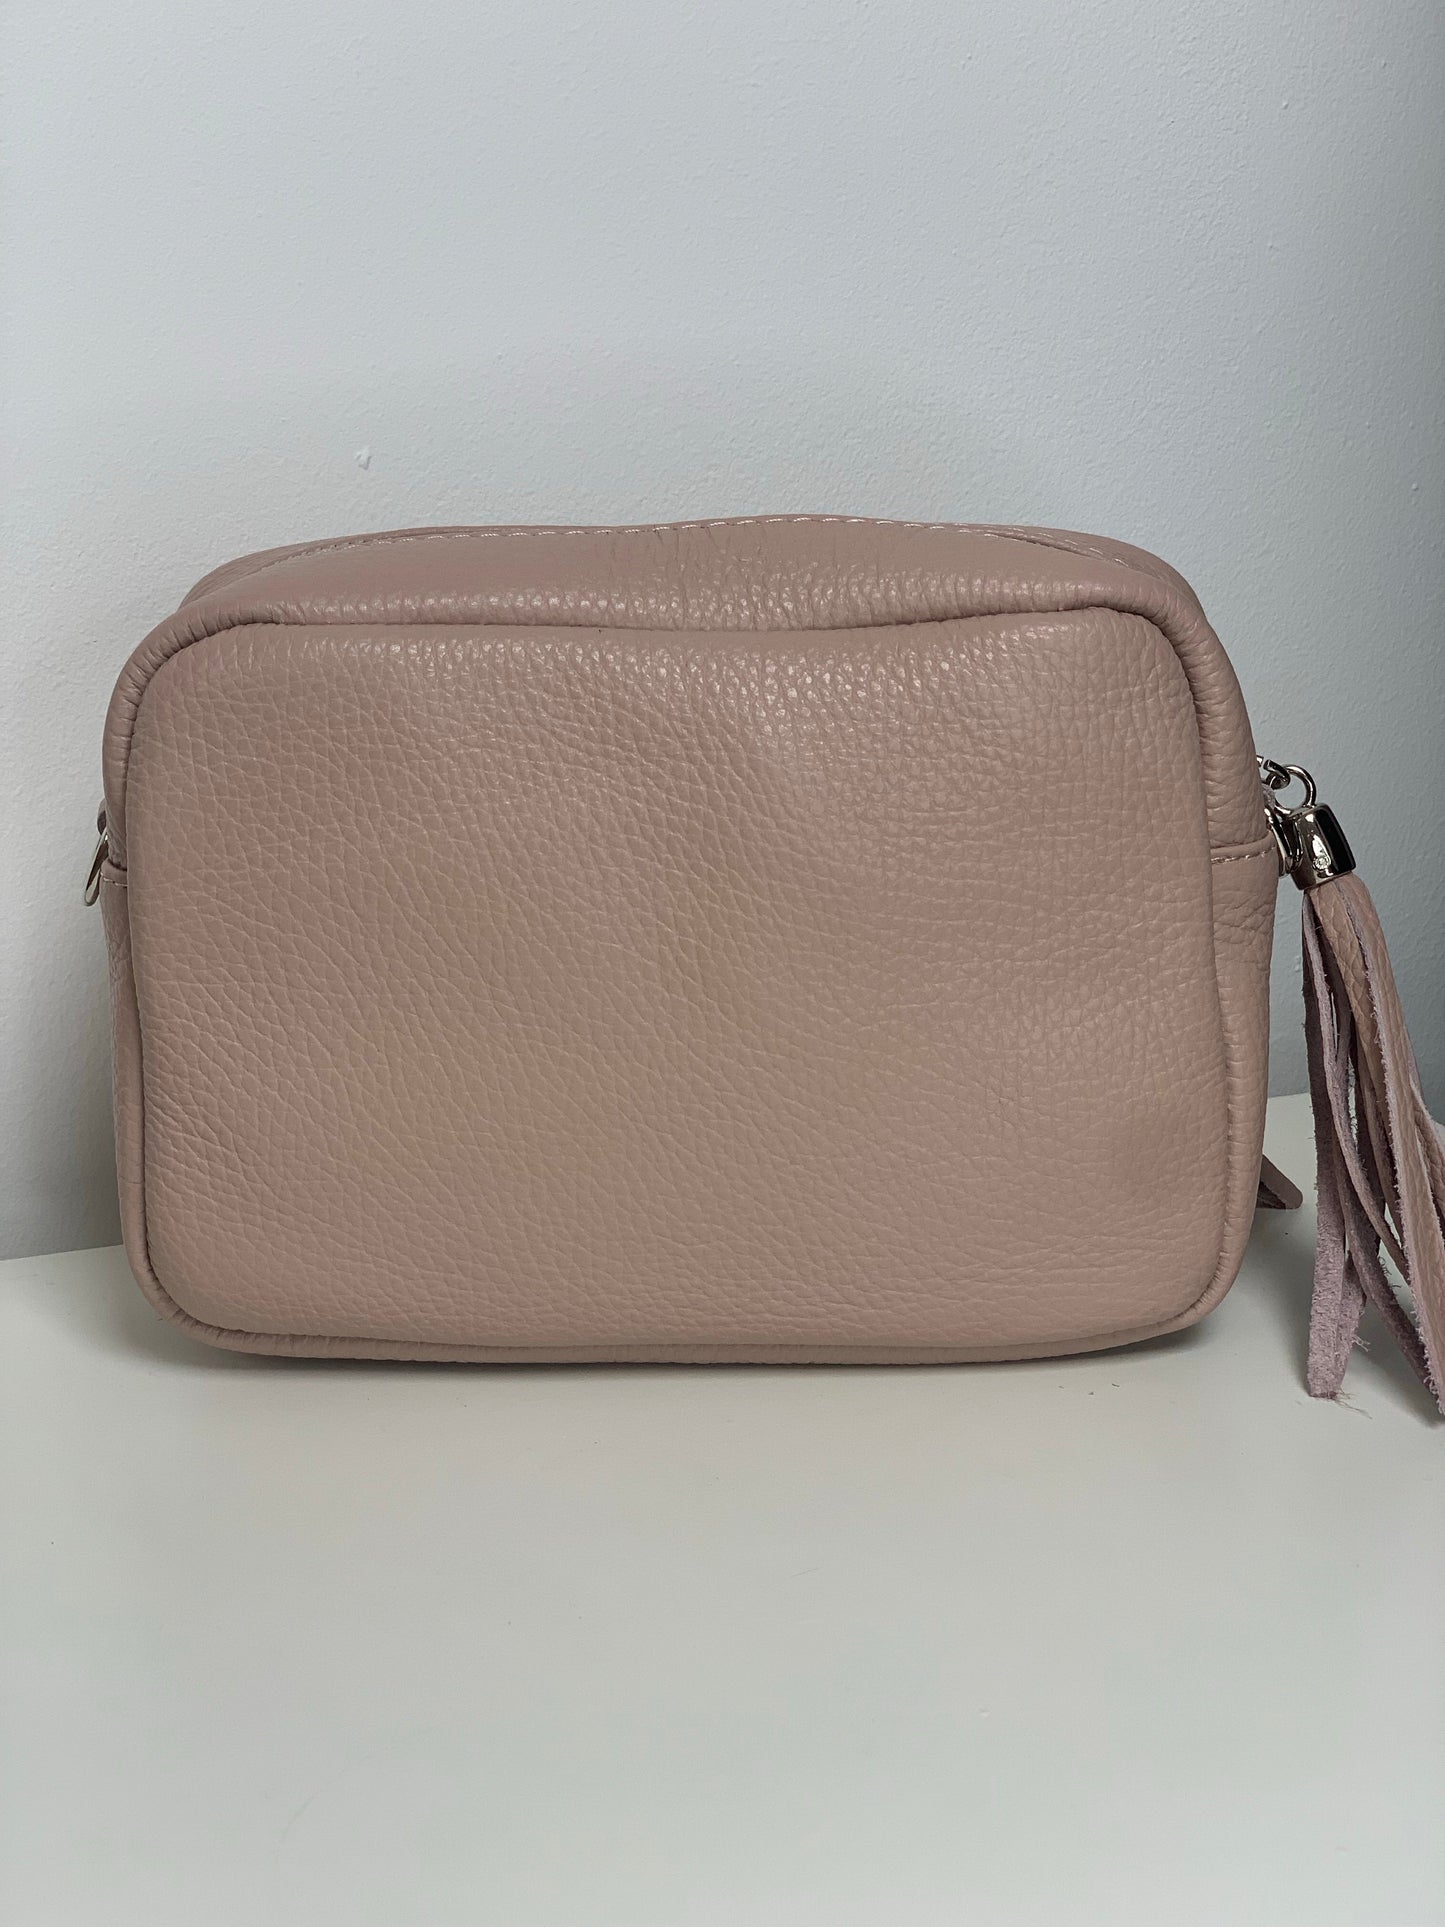 Nude Camera Bag - Real Leather